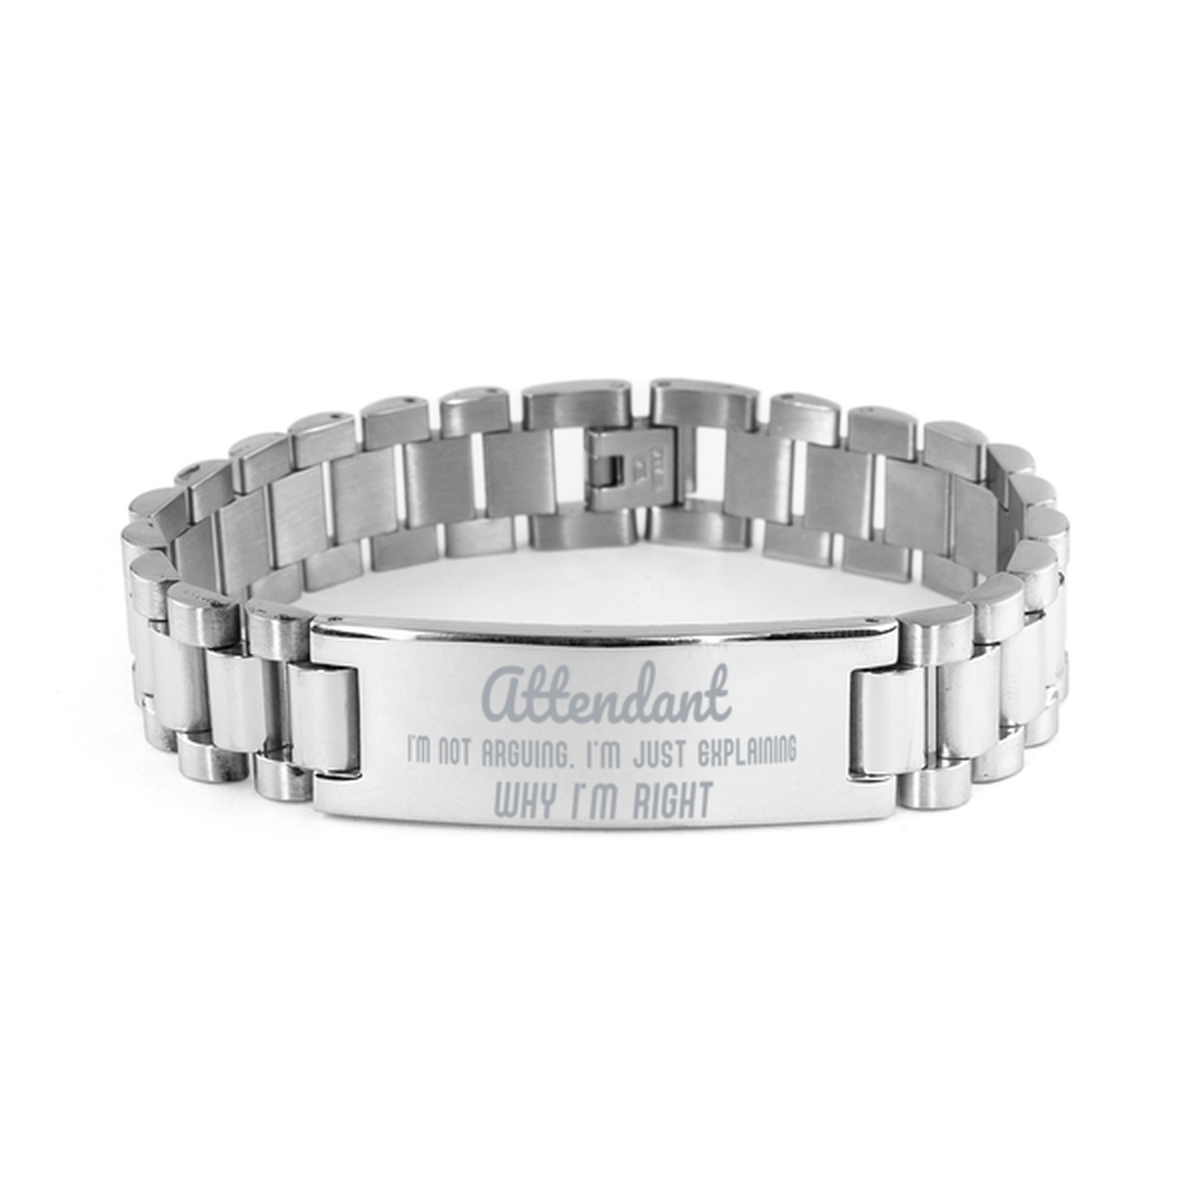 Attendant I'm not Arguing. I'm Just Explaining Why I'm RIGHT Ladder Stainless Steel Bracelet, Graduation Birthday Christmas Attendant Gifts For Attendant Funny Saying Quote Present for Men Women Coworker